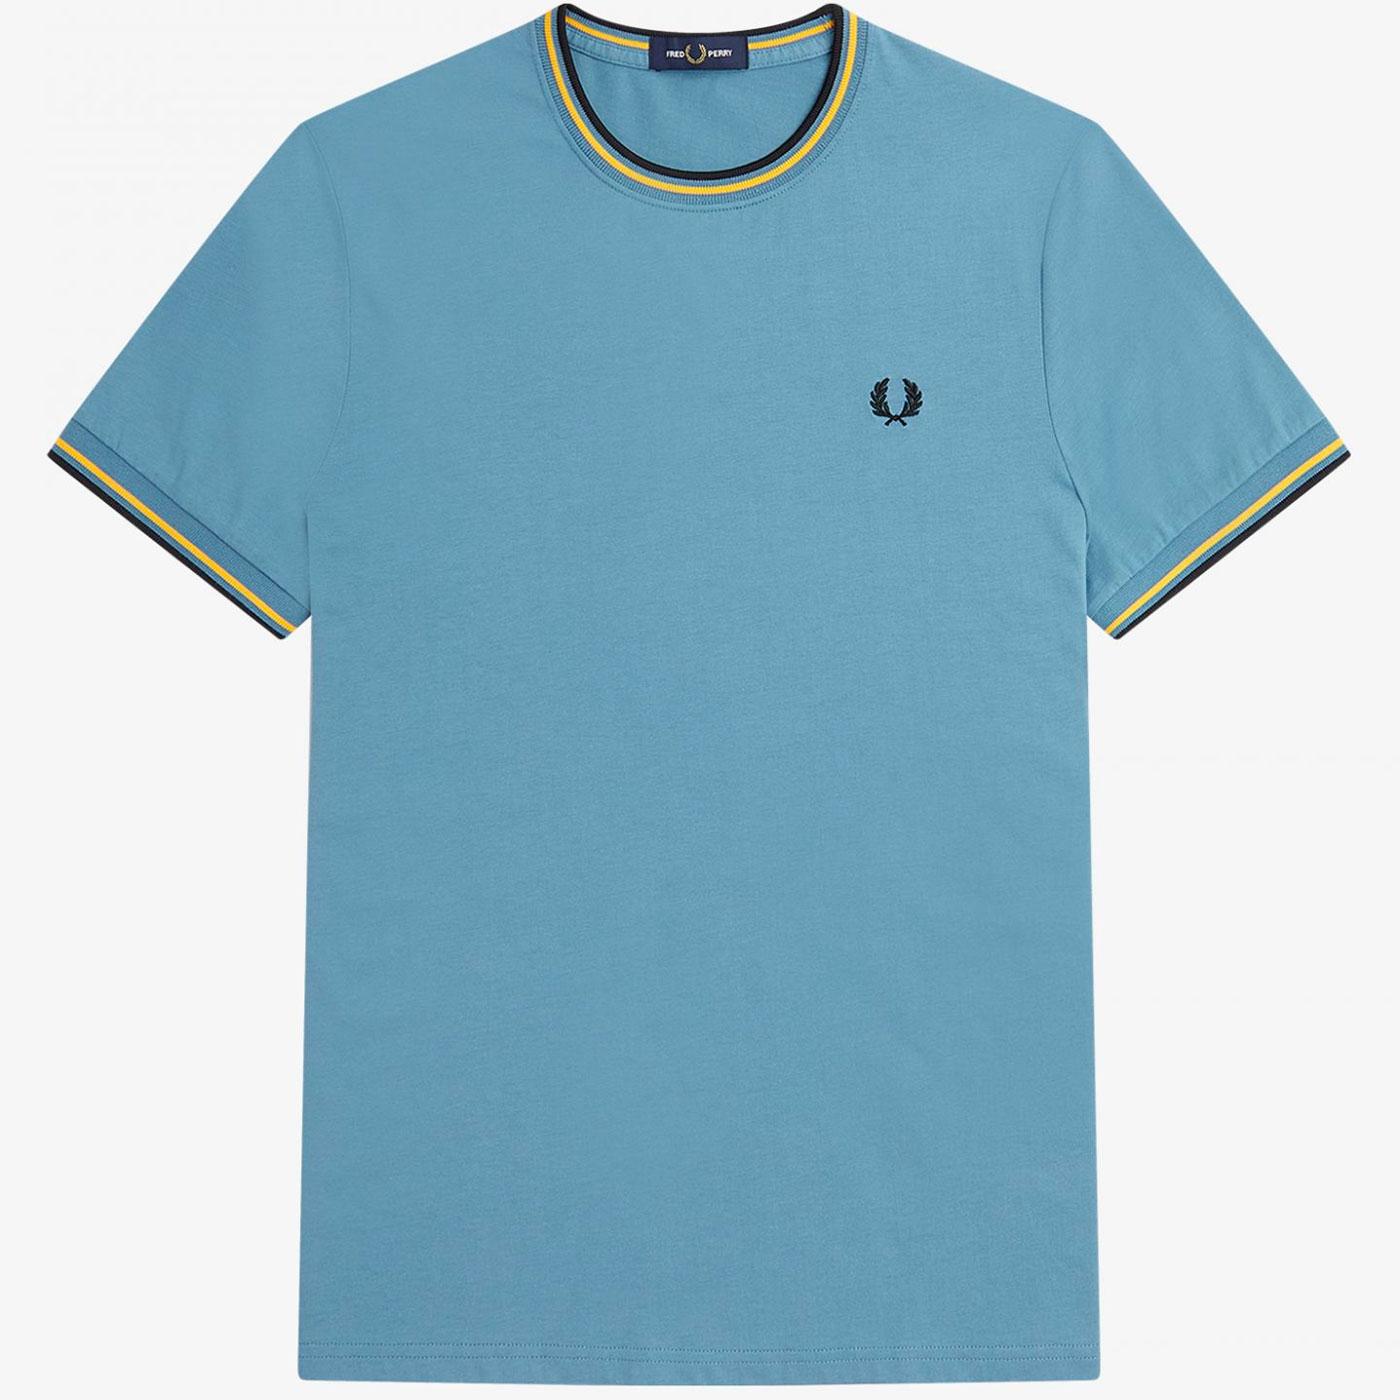 M1588 FRED PERRY MOD TWIN TIPPED T-SHIRT ASH BLUE